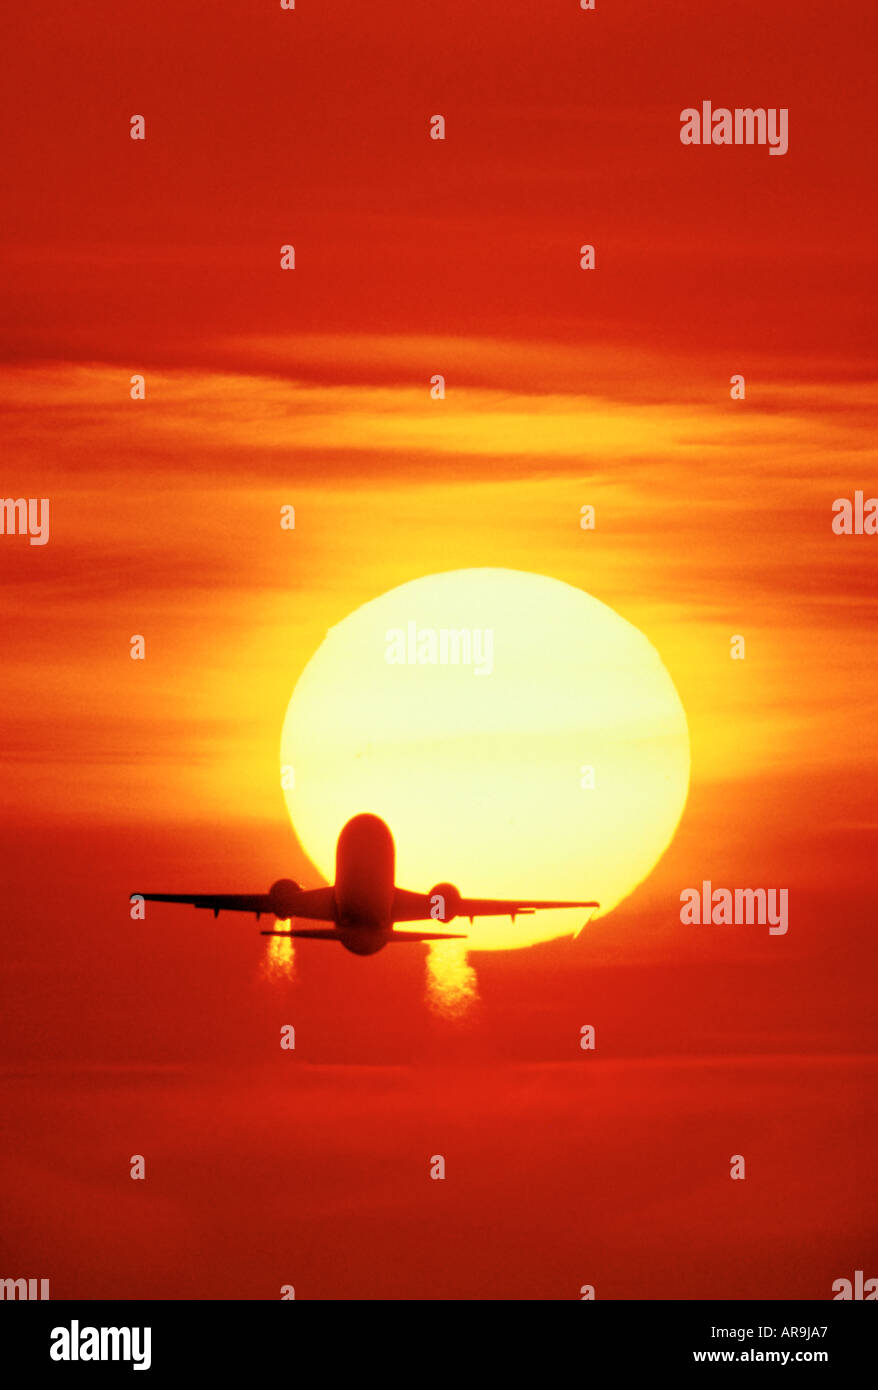 Boeing 737 in the air flying into an golden orange sky at sunset sunrise dusk showing jet thrust exhaust pollution silhouette Stock Photo